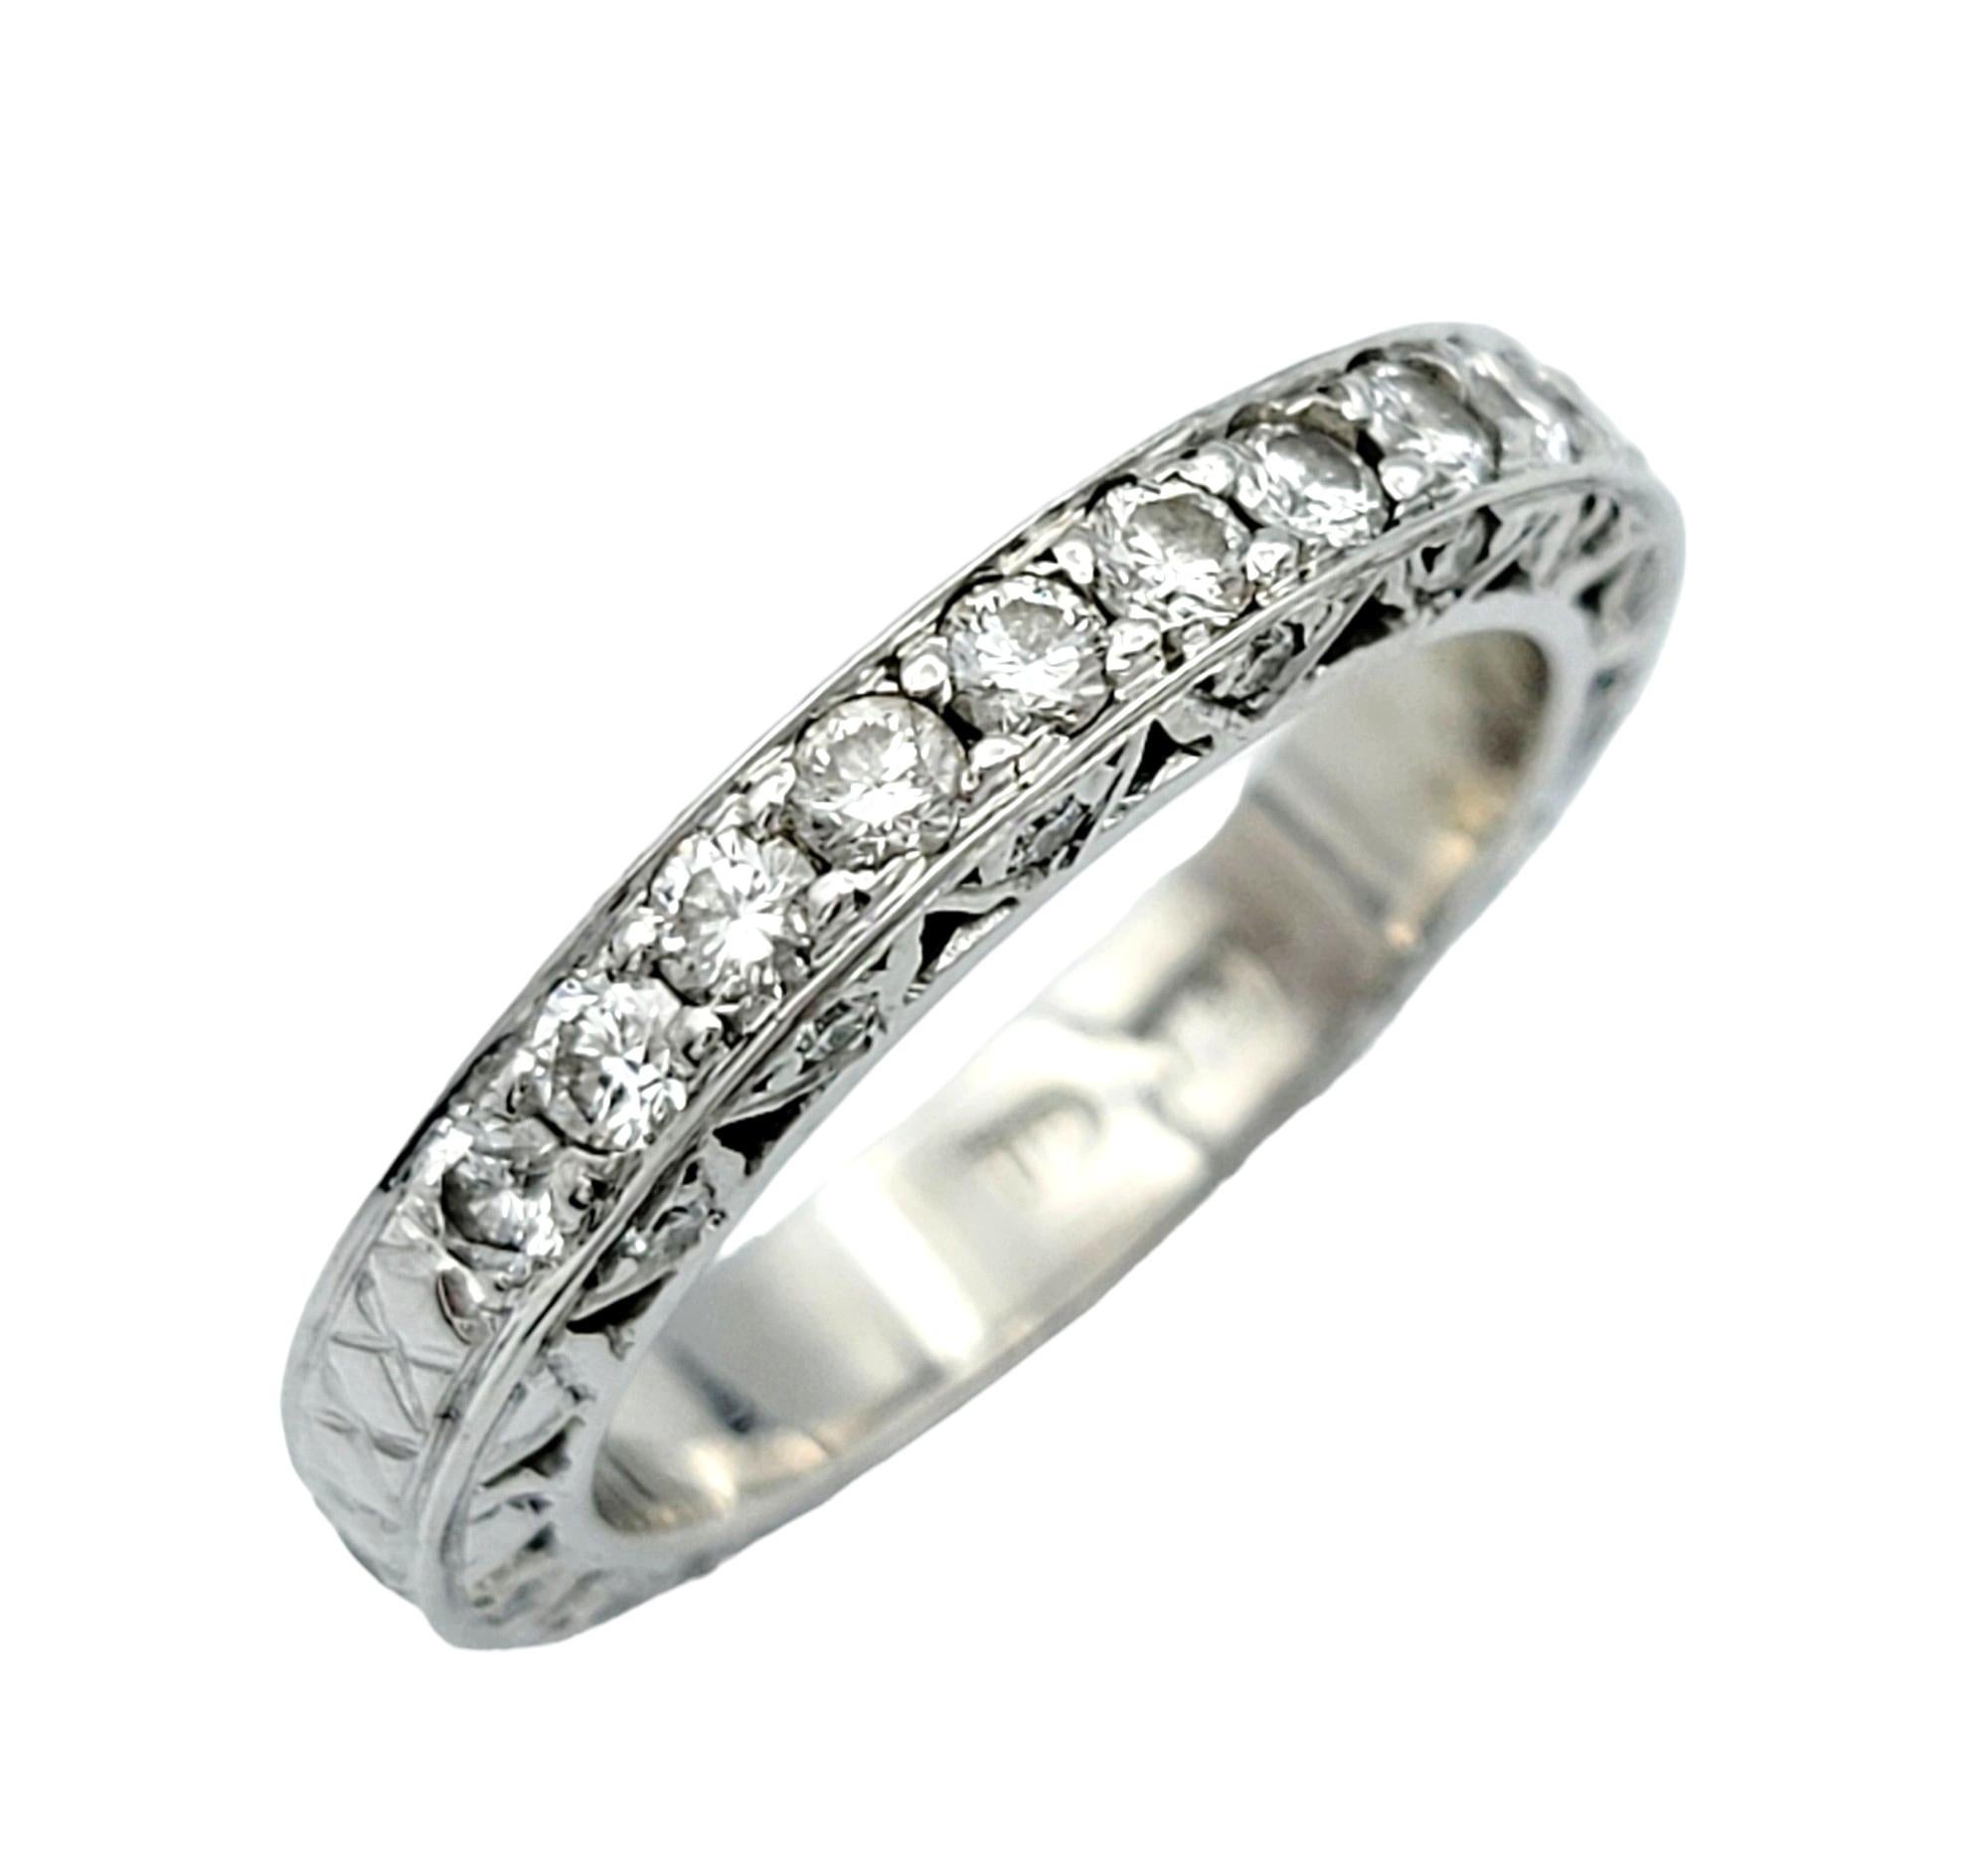 Ring Size: 5

Intricately crafted from exquisite 19 karat white gold, this diamond band ring epitomizes timeless elegance and sophistication. The centerpiece of this ring is a dazzling array of diamonds that wrap almost entirely around the band,